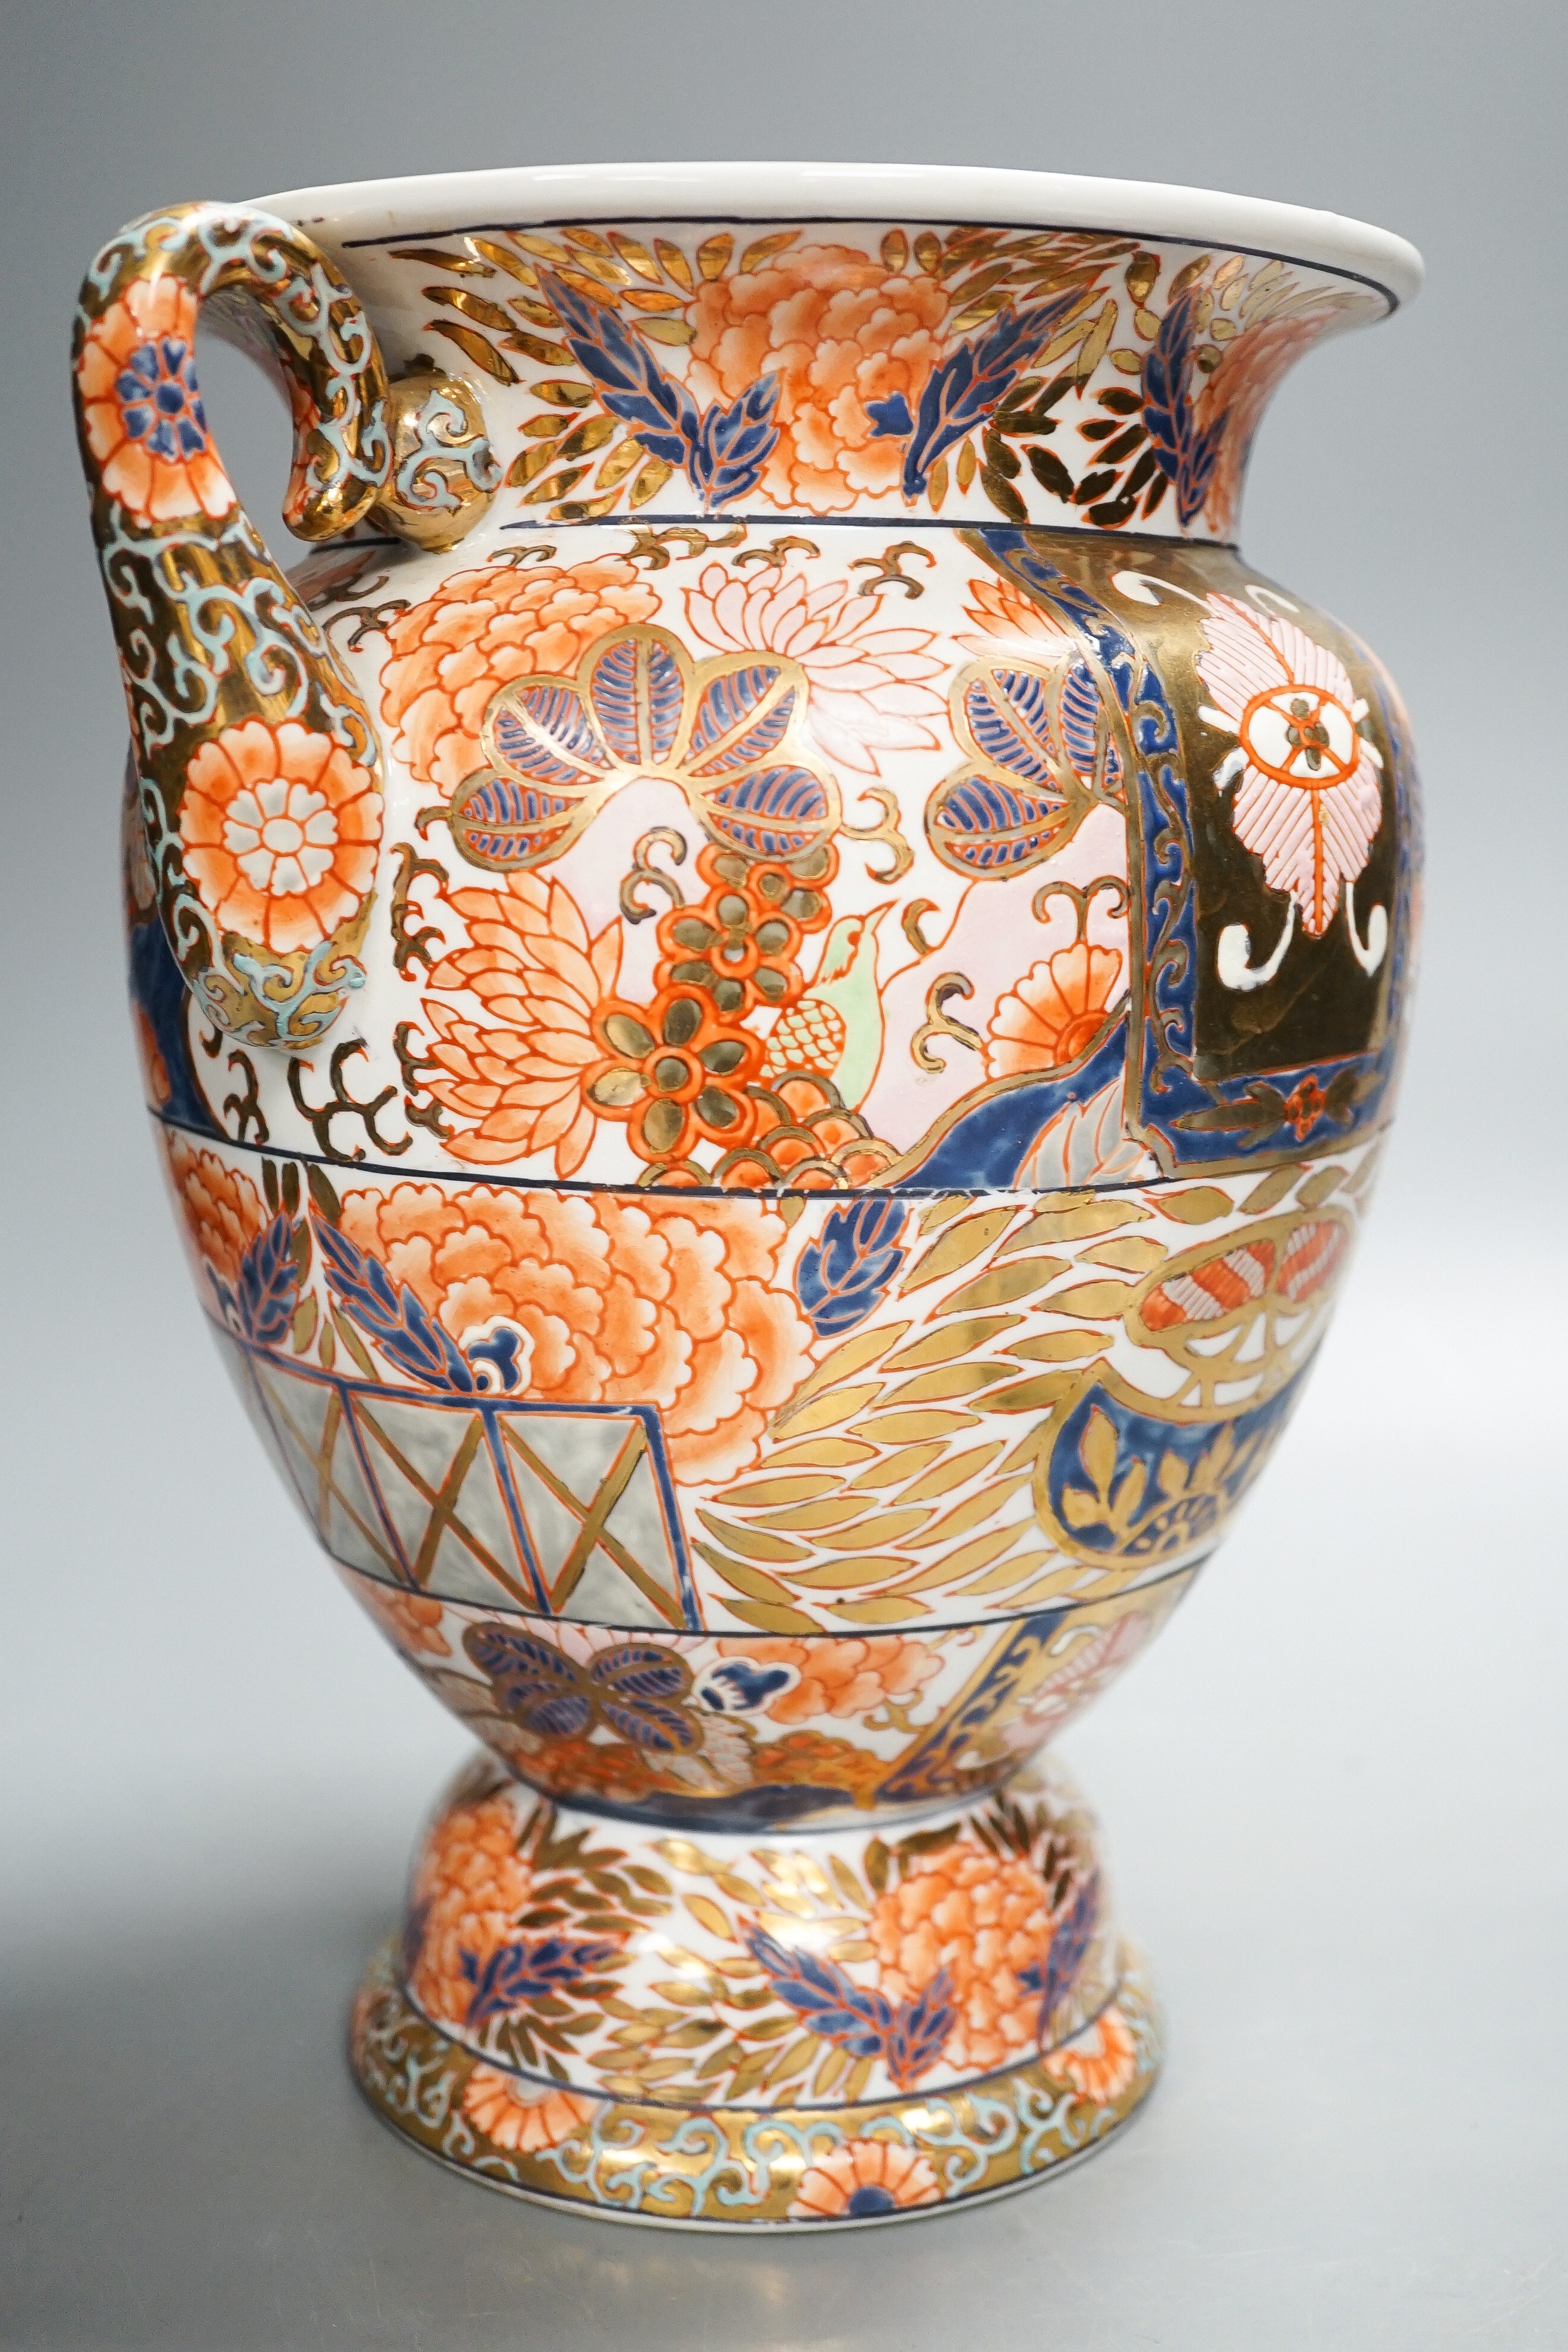 A twin handled Imari palette vase, a Japanese eggshell porcelain footed bowl, together with an 18th century Chinese porcelain bowl and saucer (with damage) 25cm (4)